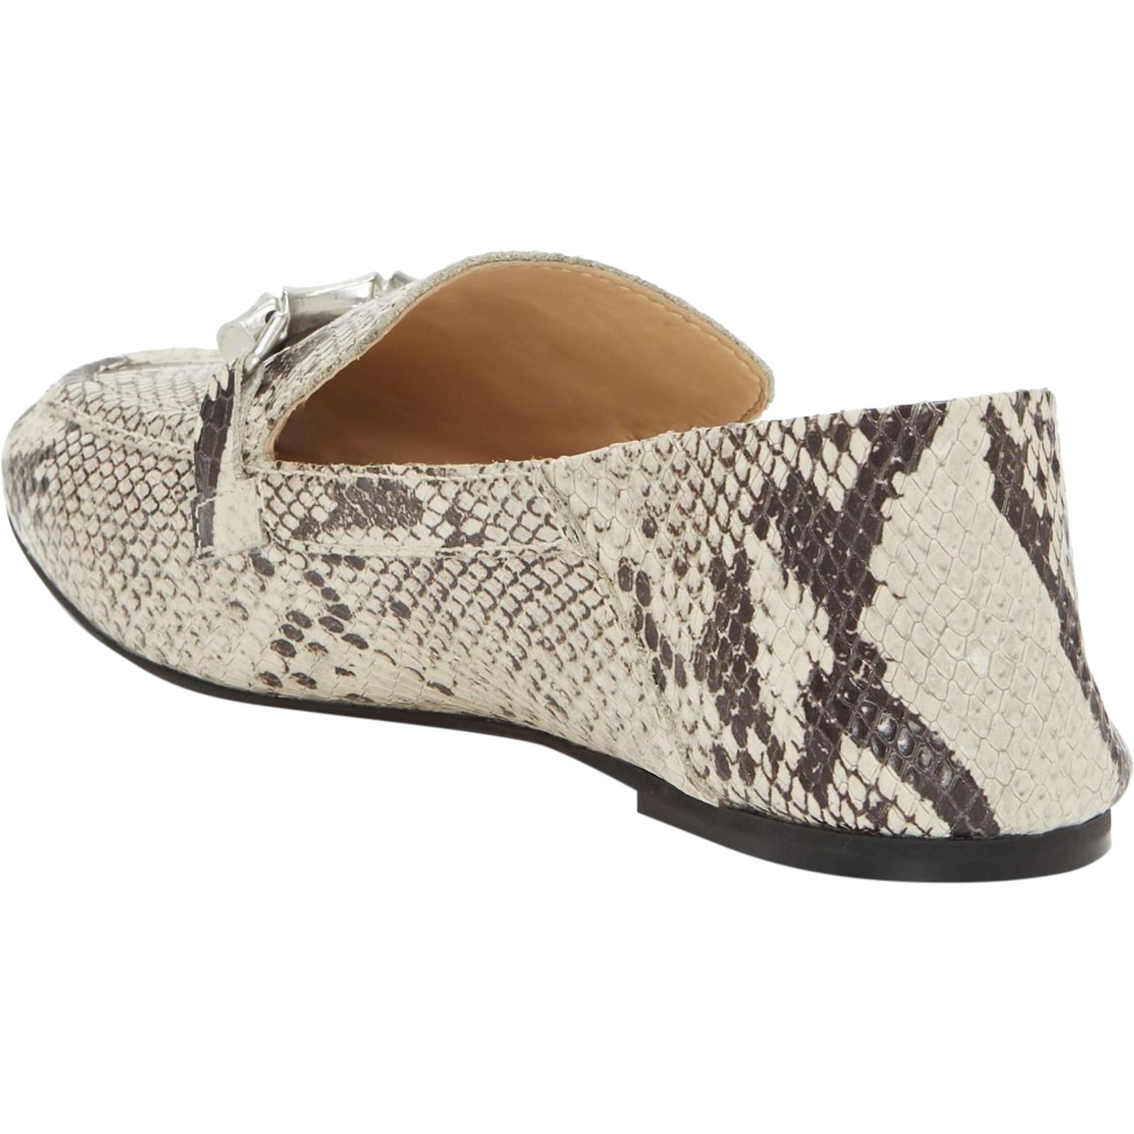 Vince Camuto Perenna Loafer - Image 8 of 10